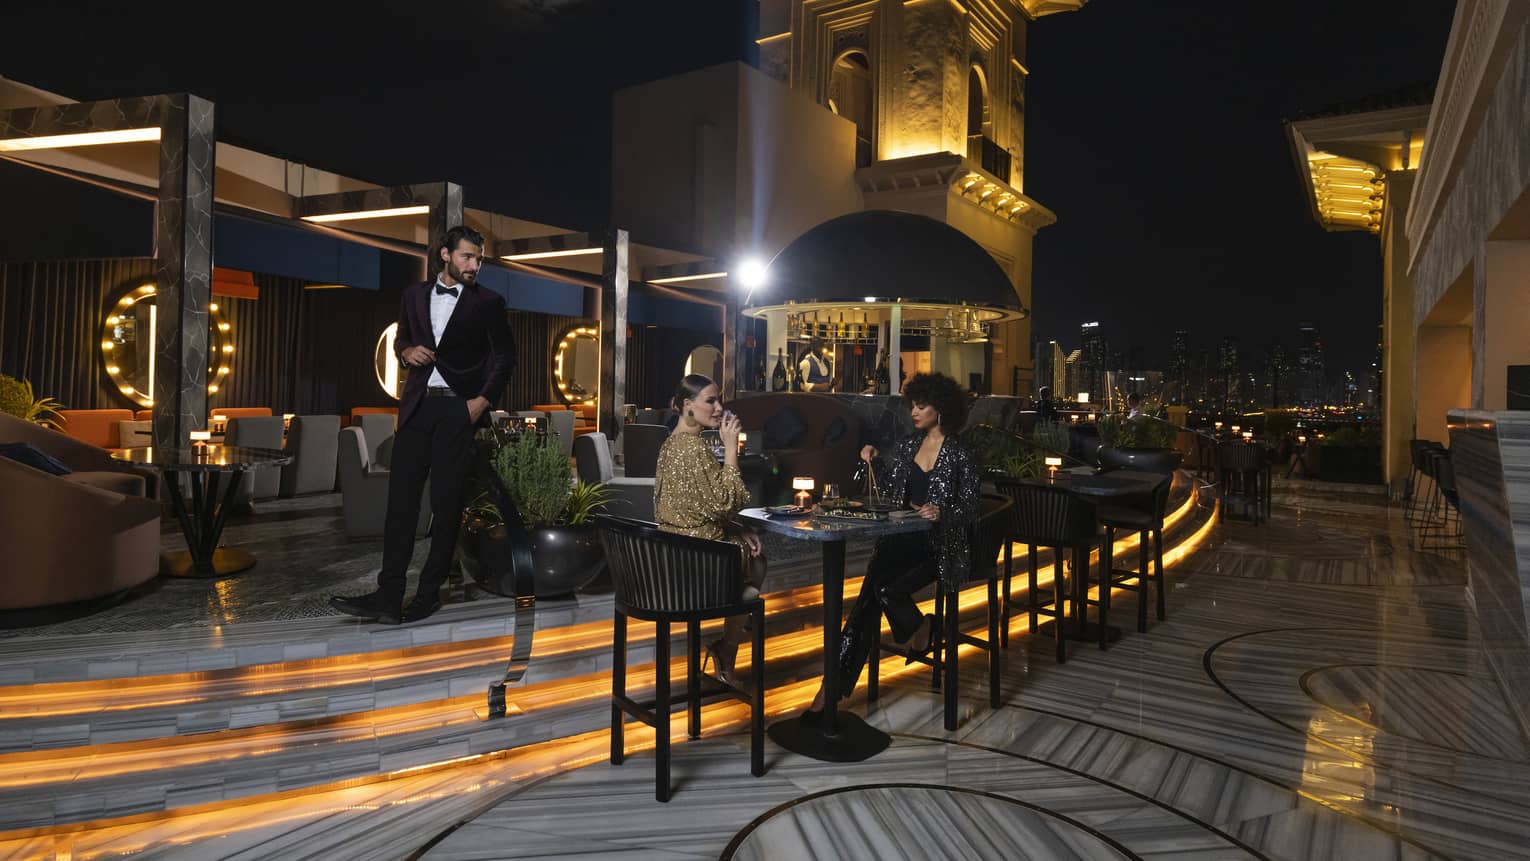 Rooftop lounge at night with two women sitting at a cocktail table and a man in a tuxedo walking behind them